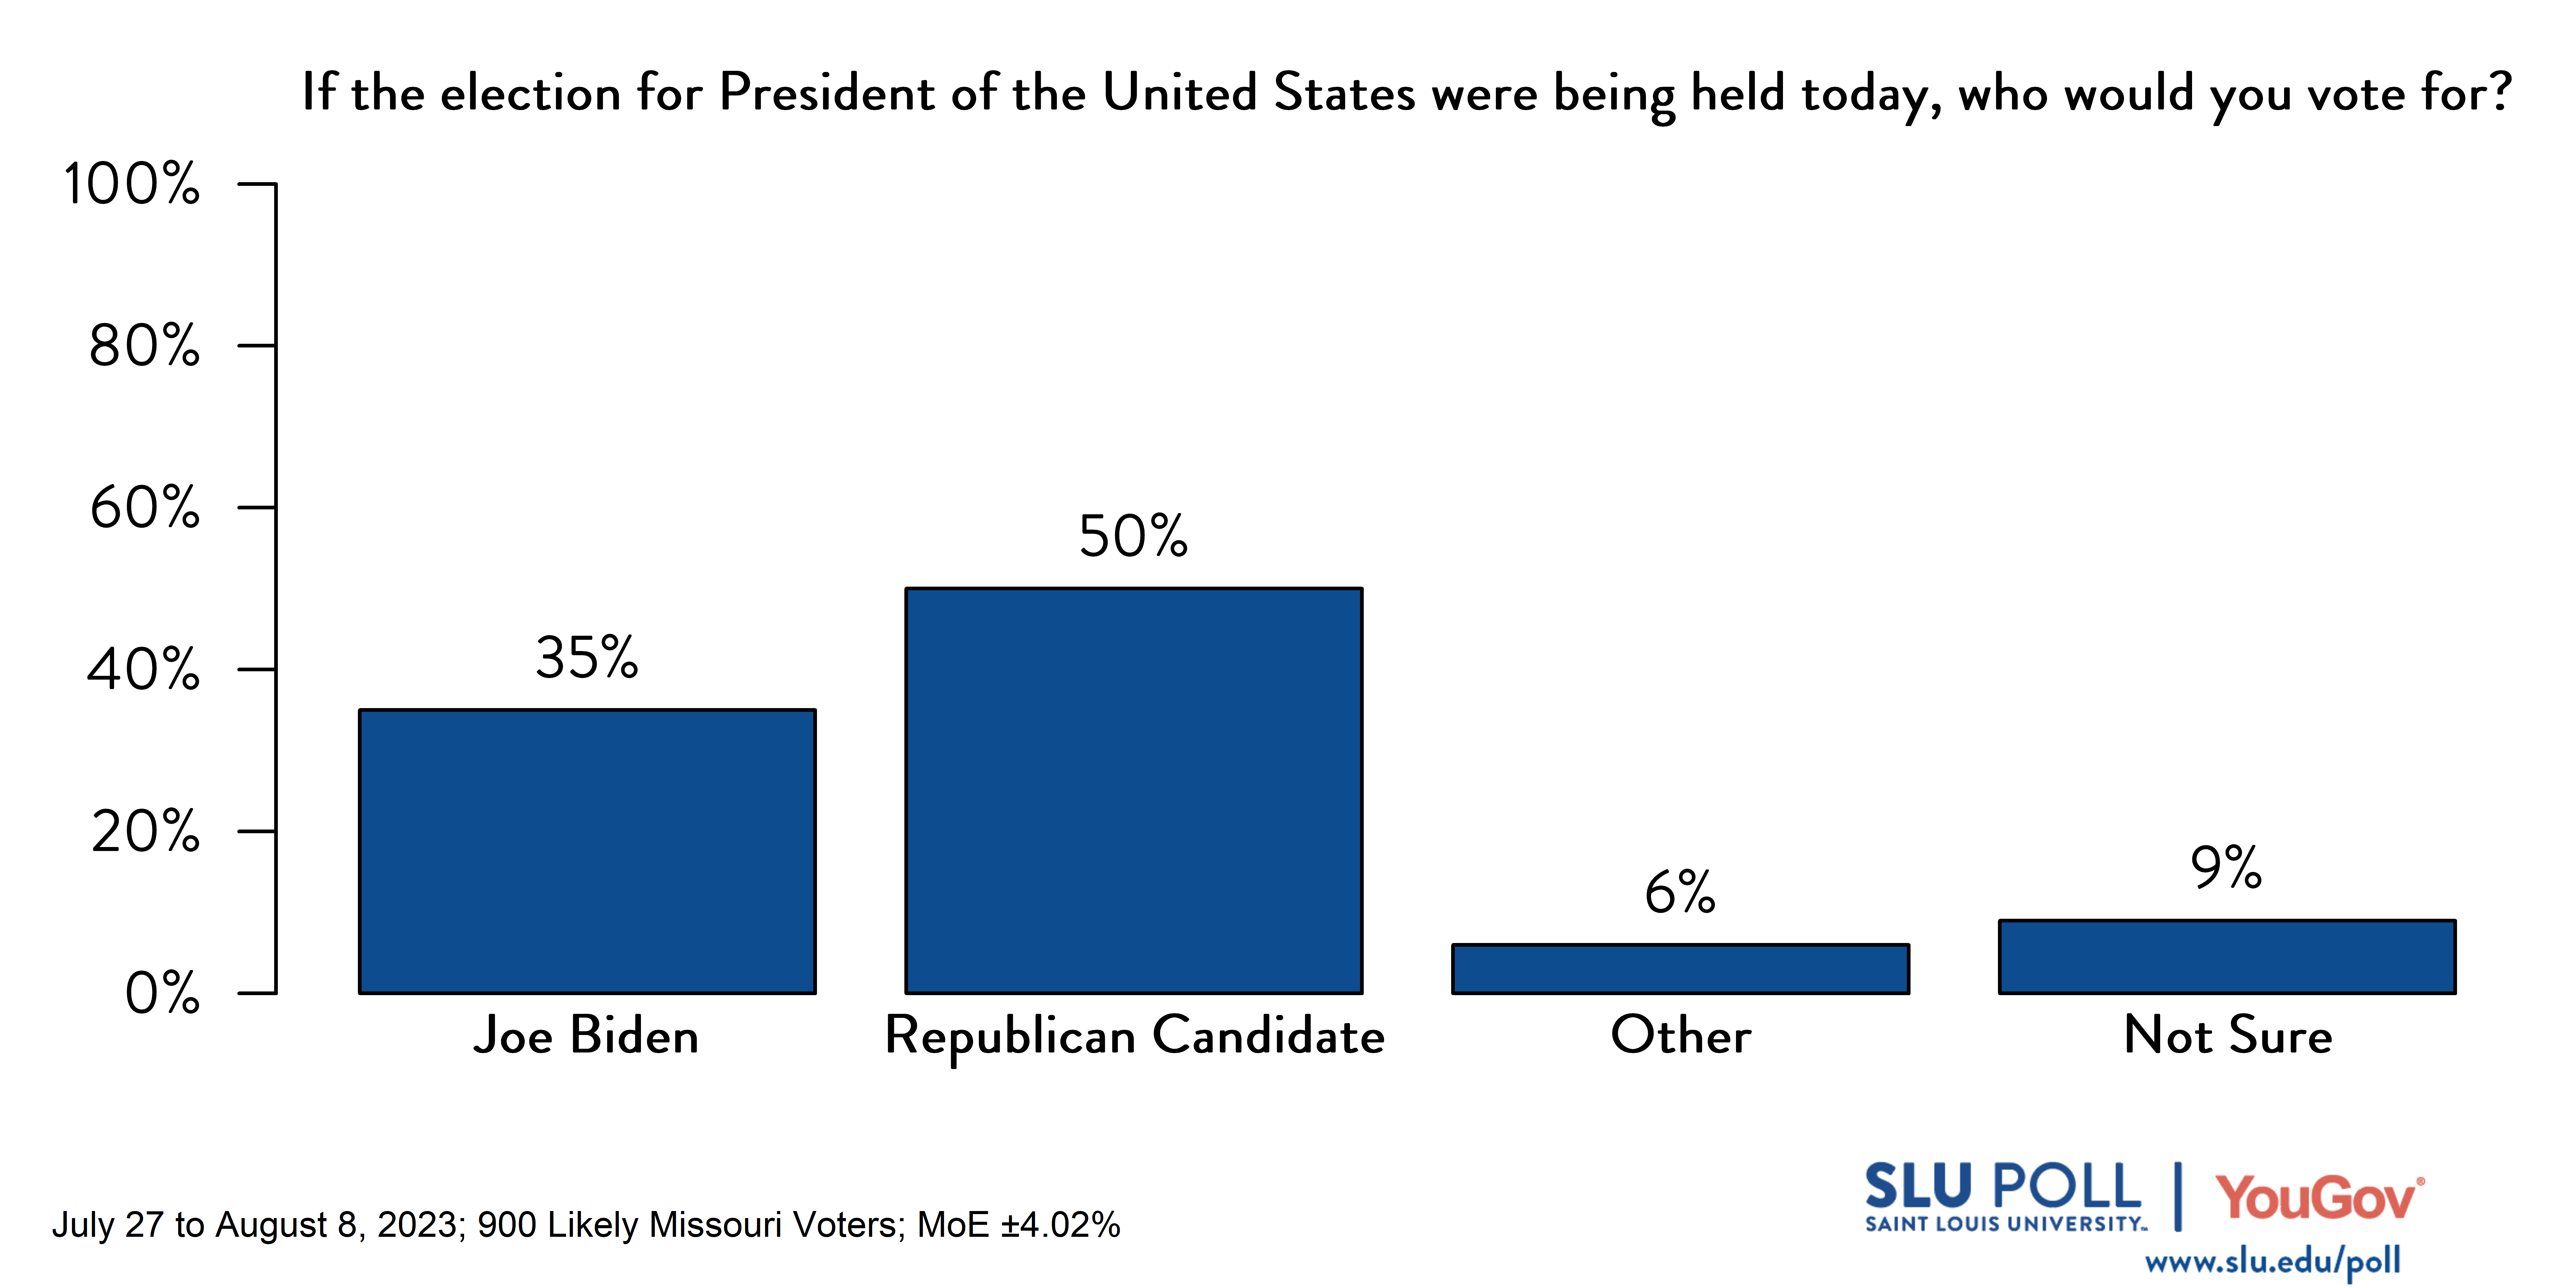 Likely voters' responses to 'If the election for President of the United States were being held today, who would you vote for?': 35% Joe Biden (D), 50% R, 6% Other, and 9% Not sure.